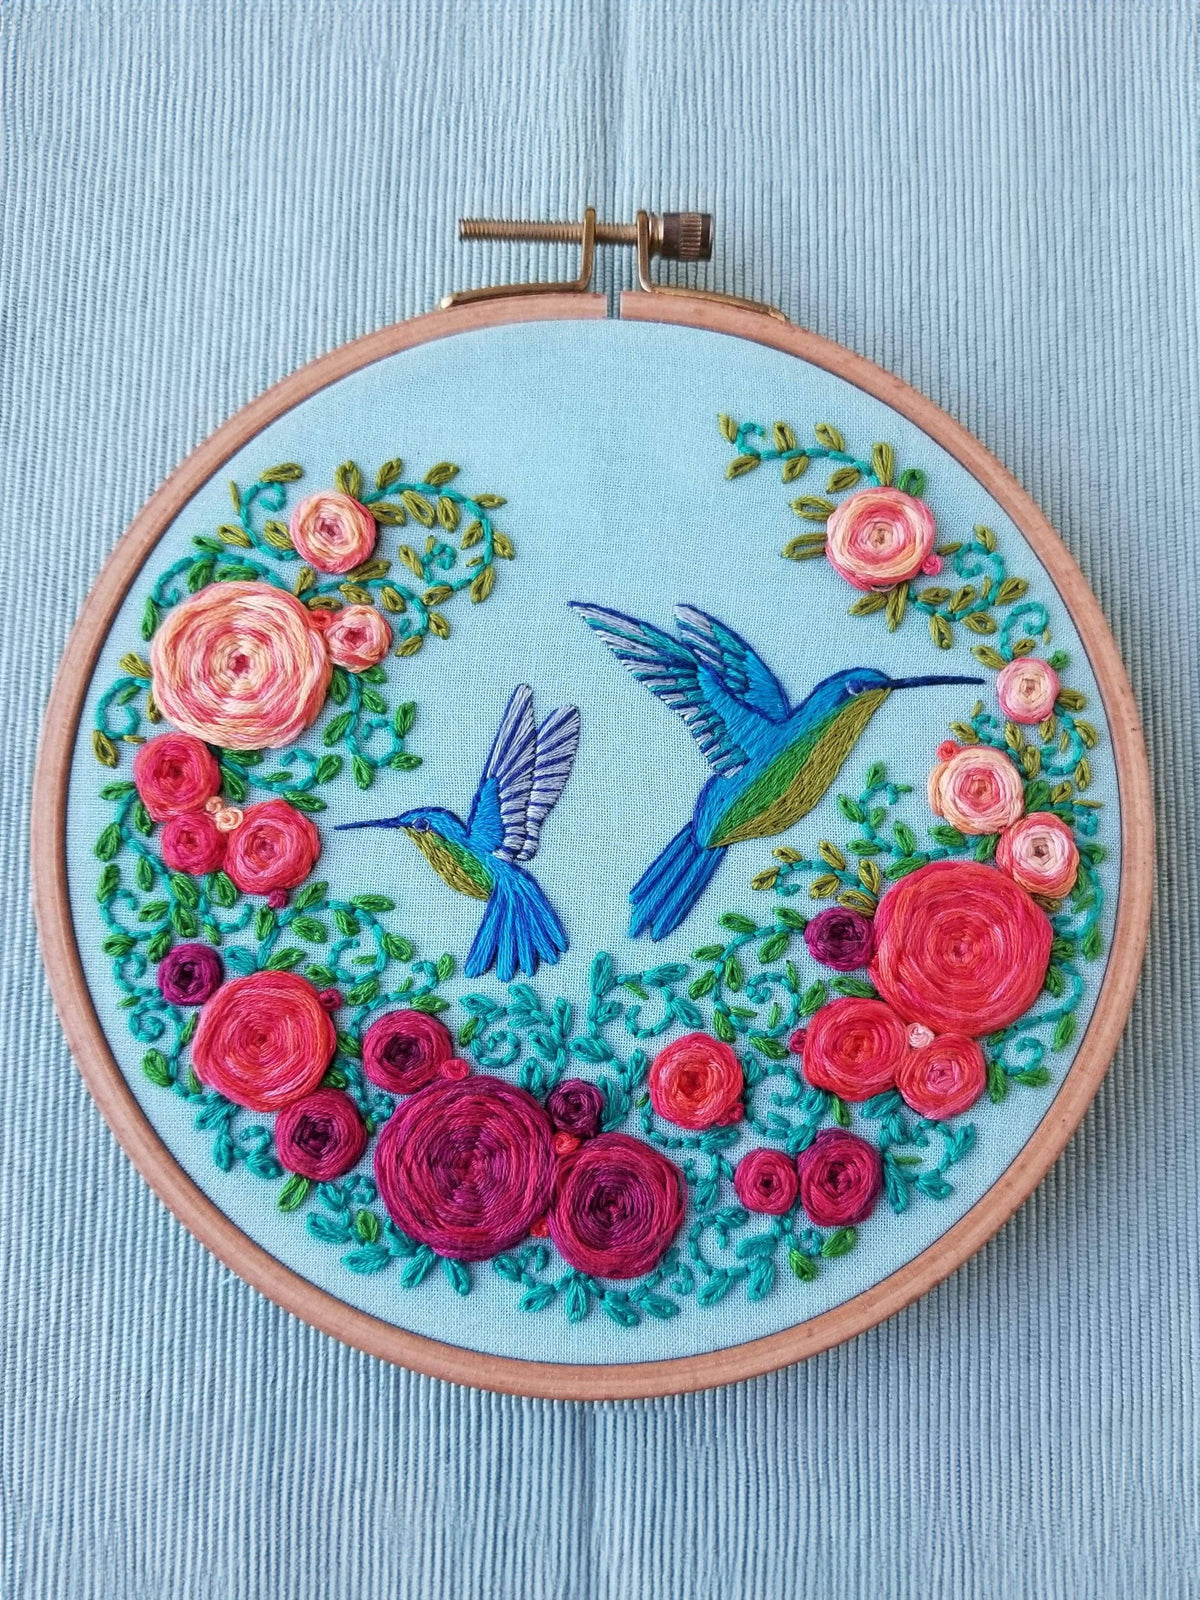 Jessica Long Embroidery Embroidery Kit Summer Hummingbird Embroidery Kit